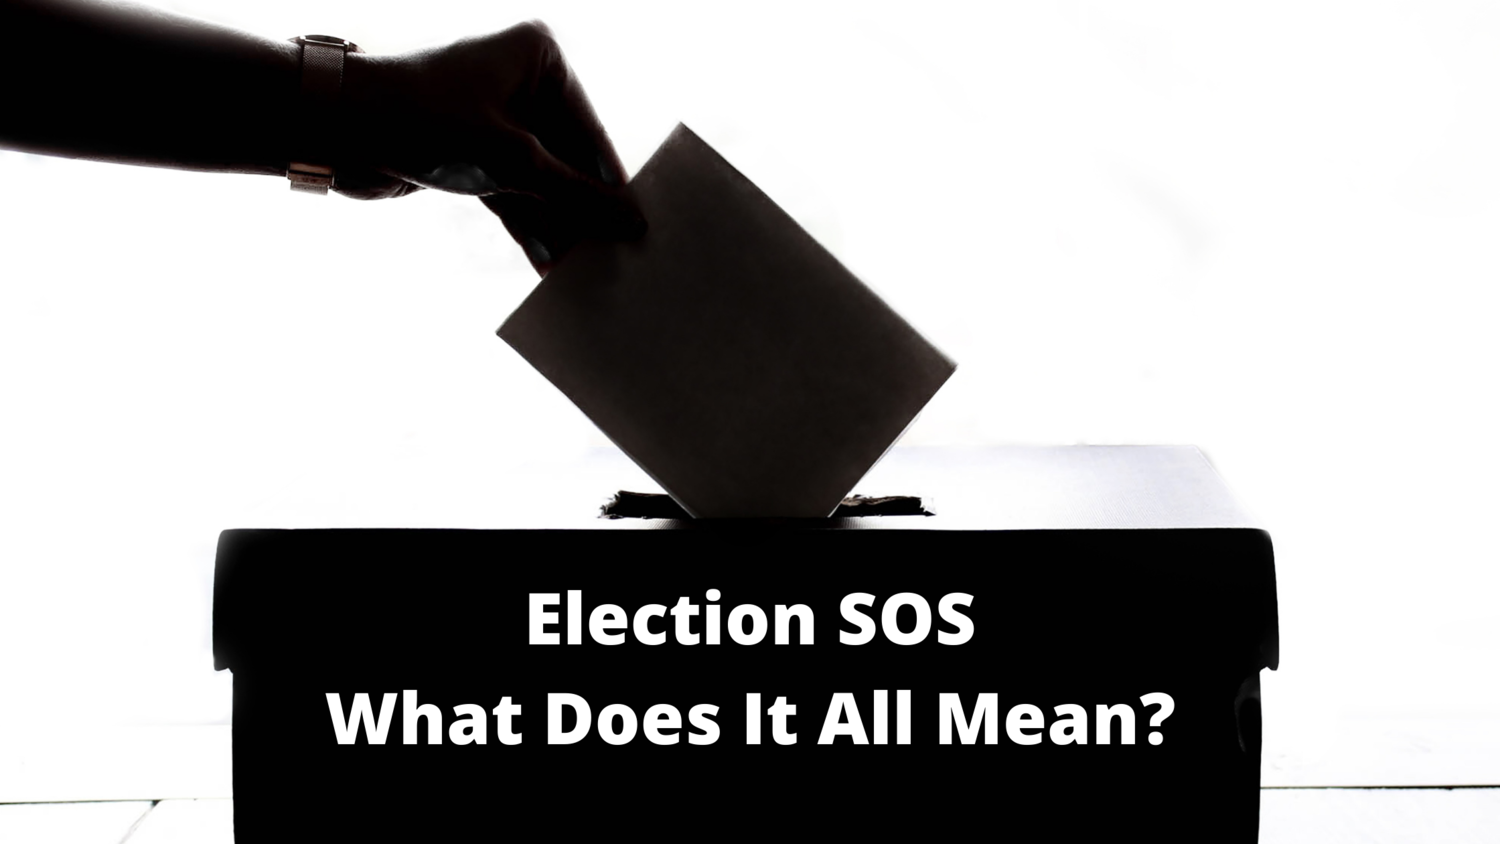 What does sos stand for